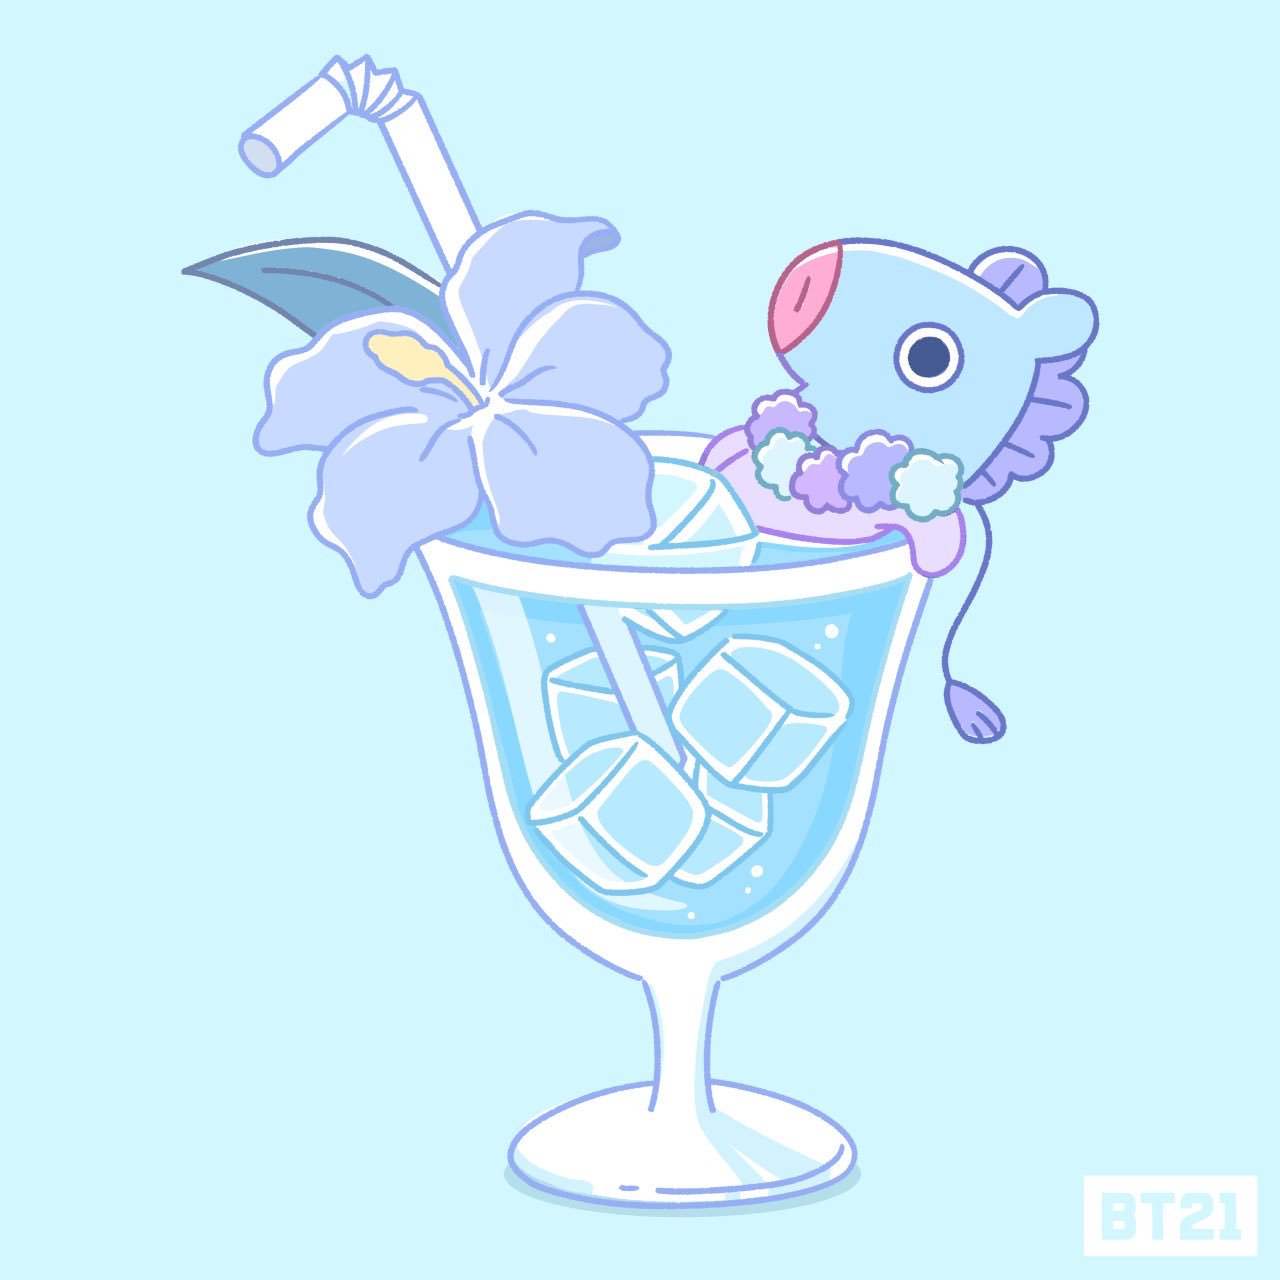  BT21  on Twitter The world is yours MANG  BT21  